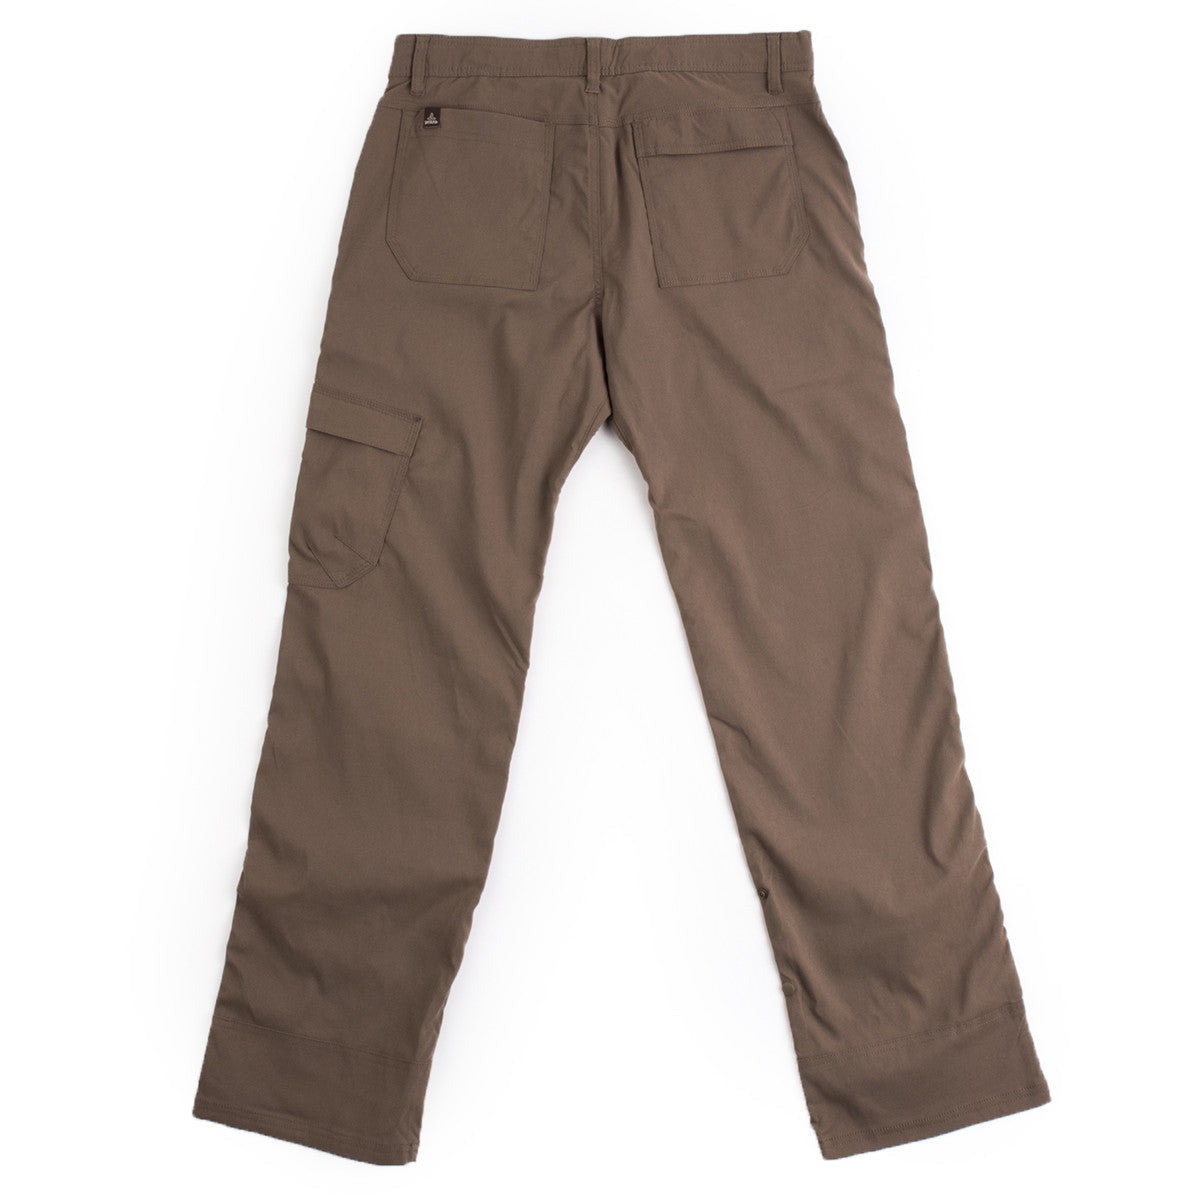 Prana Stretch Zion pants functional style perfect for travel